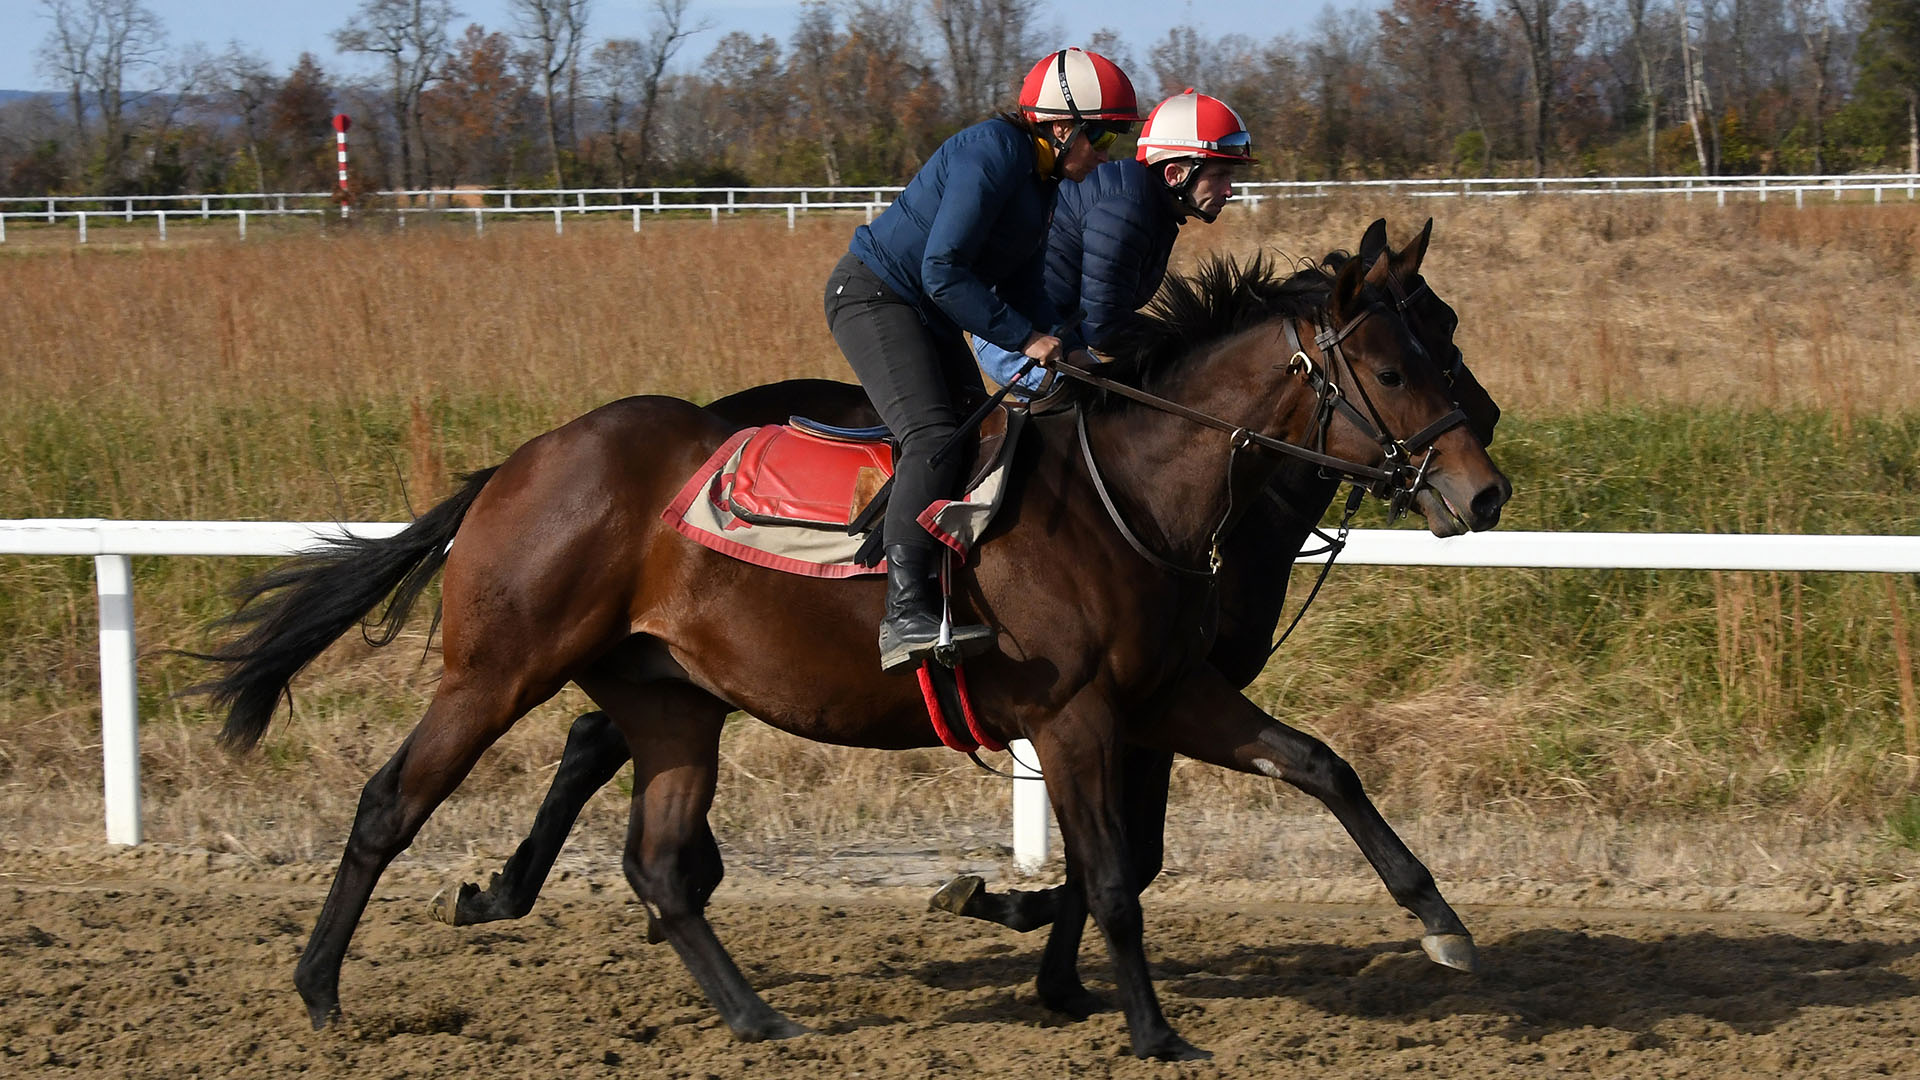 Arrogate colt out of the Harlan's Holiday mare Stellaris, purchased at Fasig-Tipton's 100th Saratoga Sale and available in the Kiawah thoroughbred racing partnership. He is shown galloping at the Middleburg Training Center.